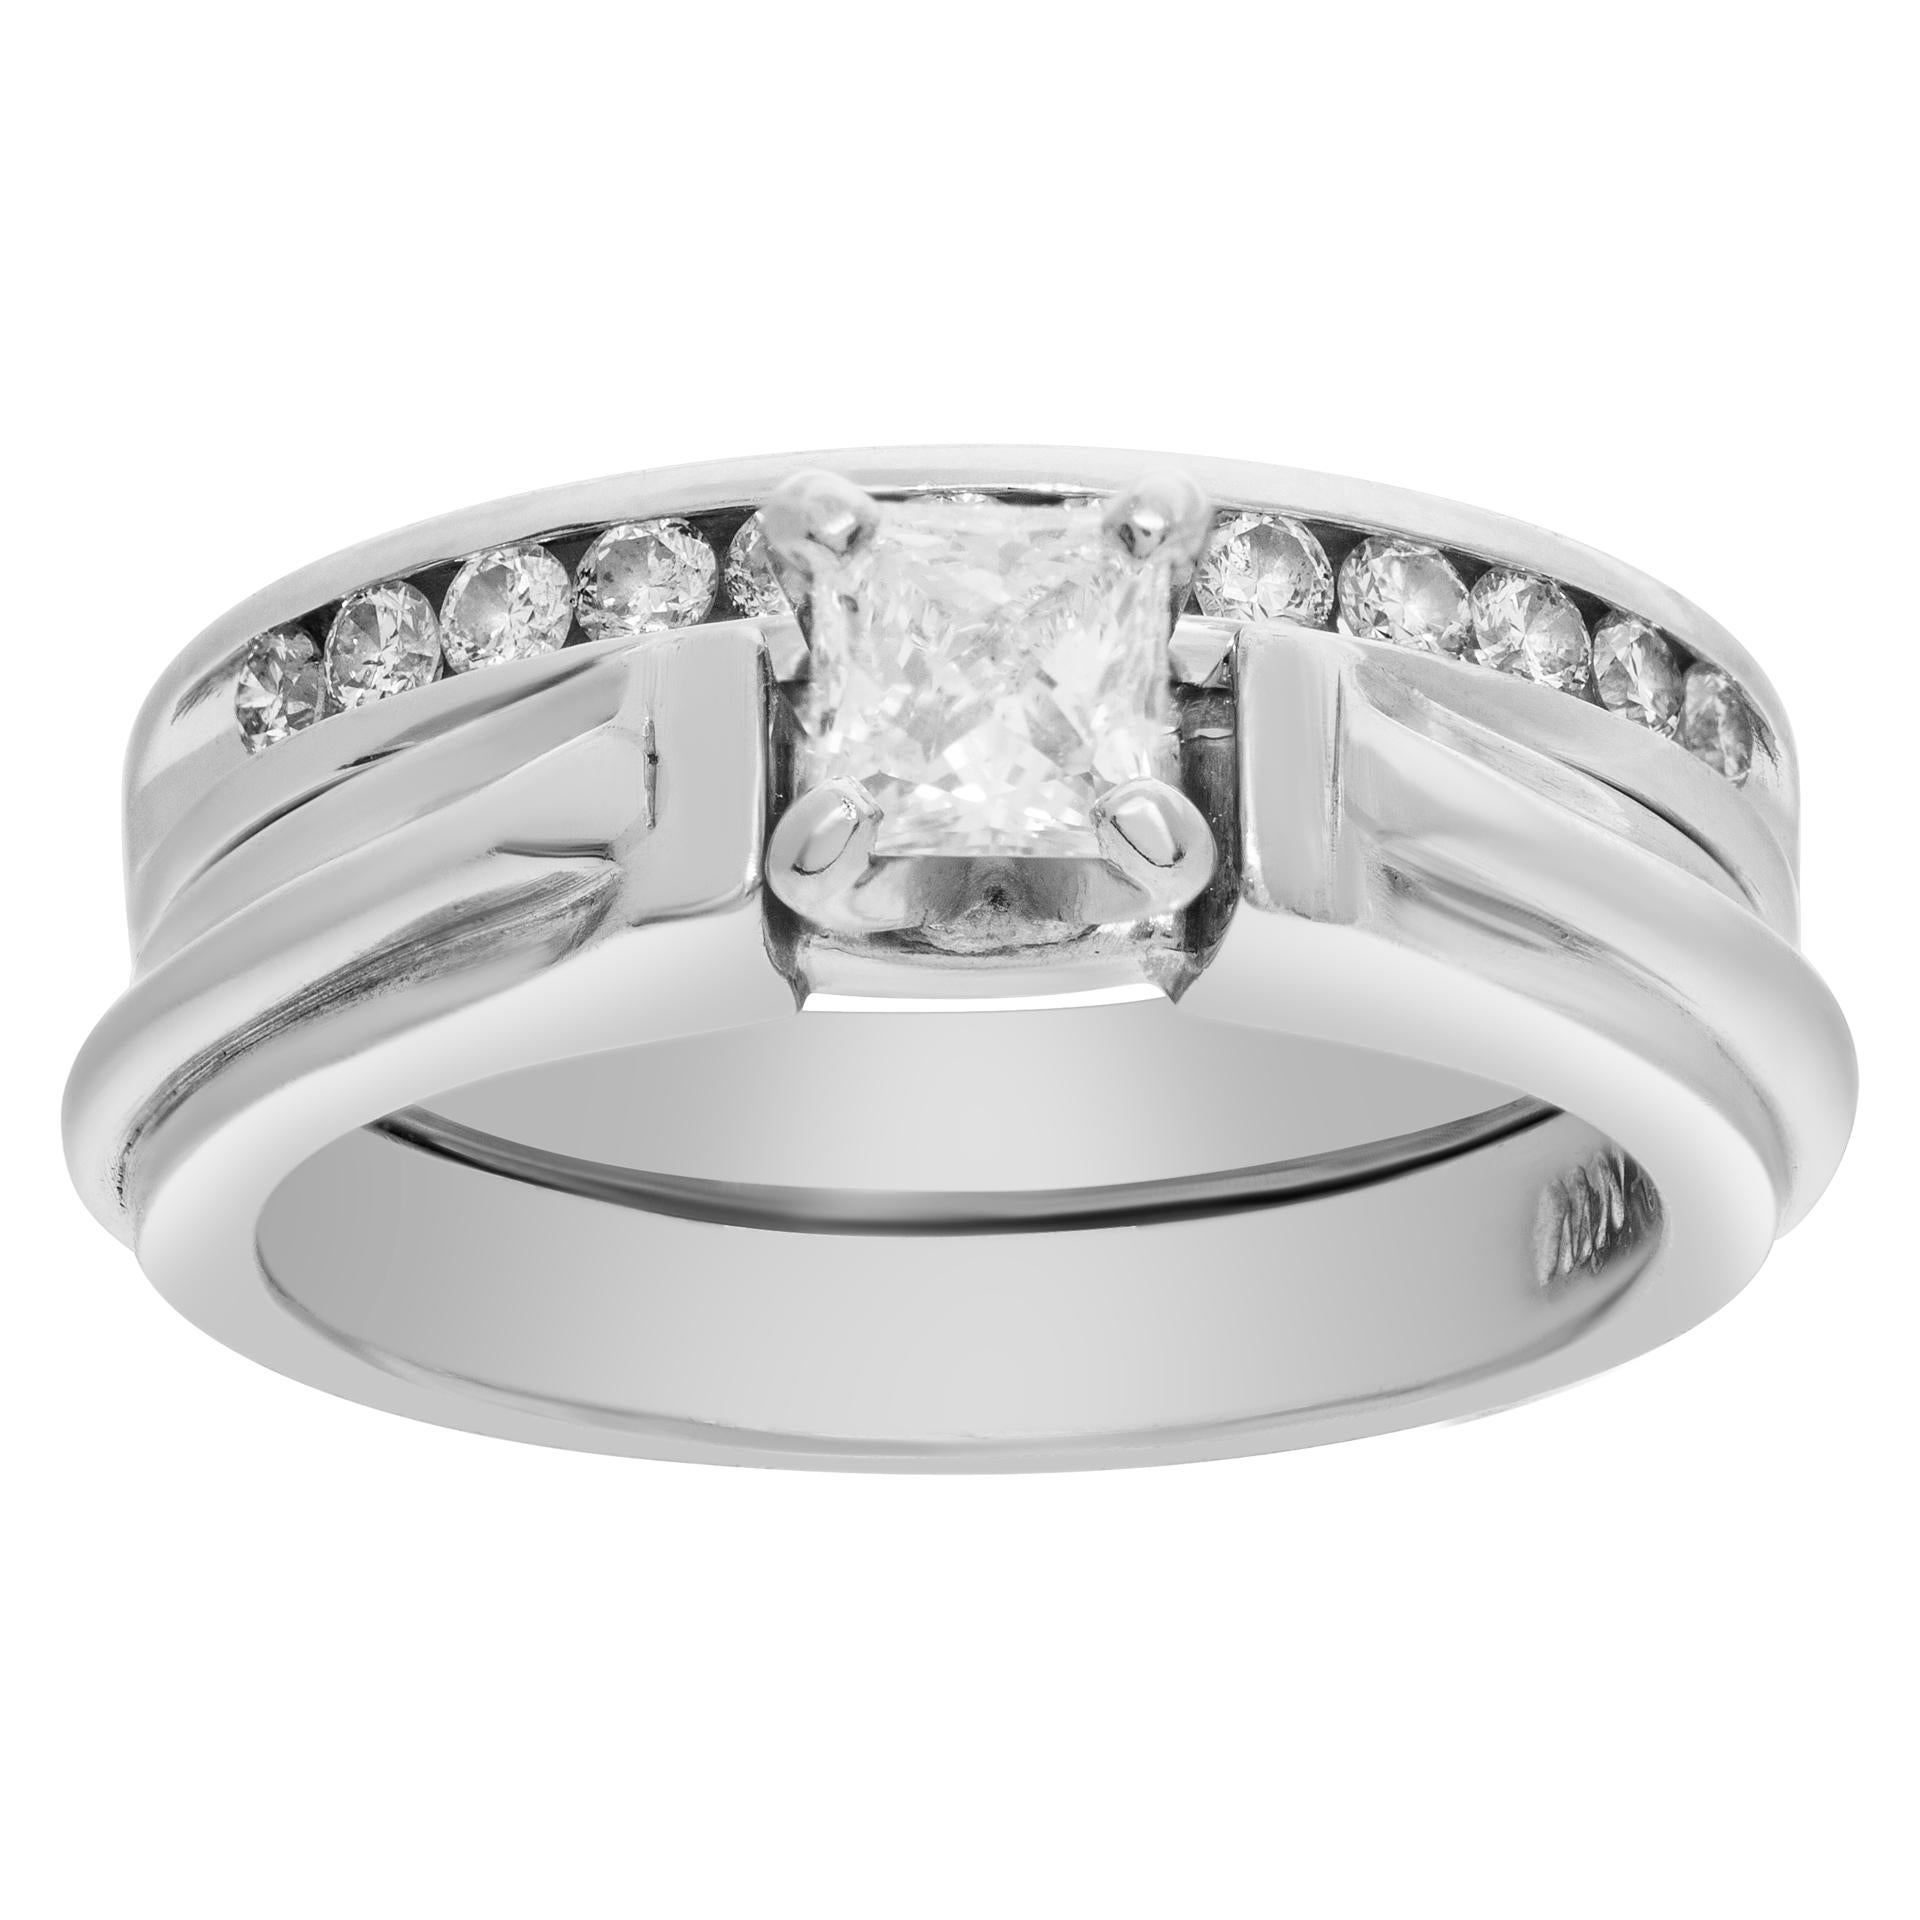 Stunning round and princess cut diamond ring in platinum with approximately 0.50 carat diamonds. Size 4.5.

This Diamond ring is currently size 4.5 and some items can be sized up or down, please ask! It weighs 6.8 pennyweights and is Platinum.